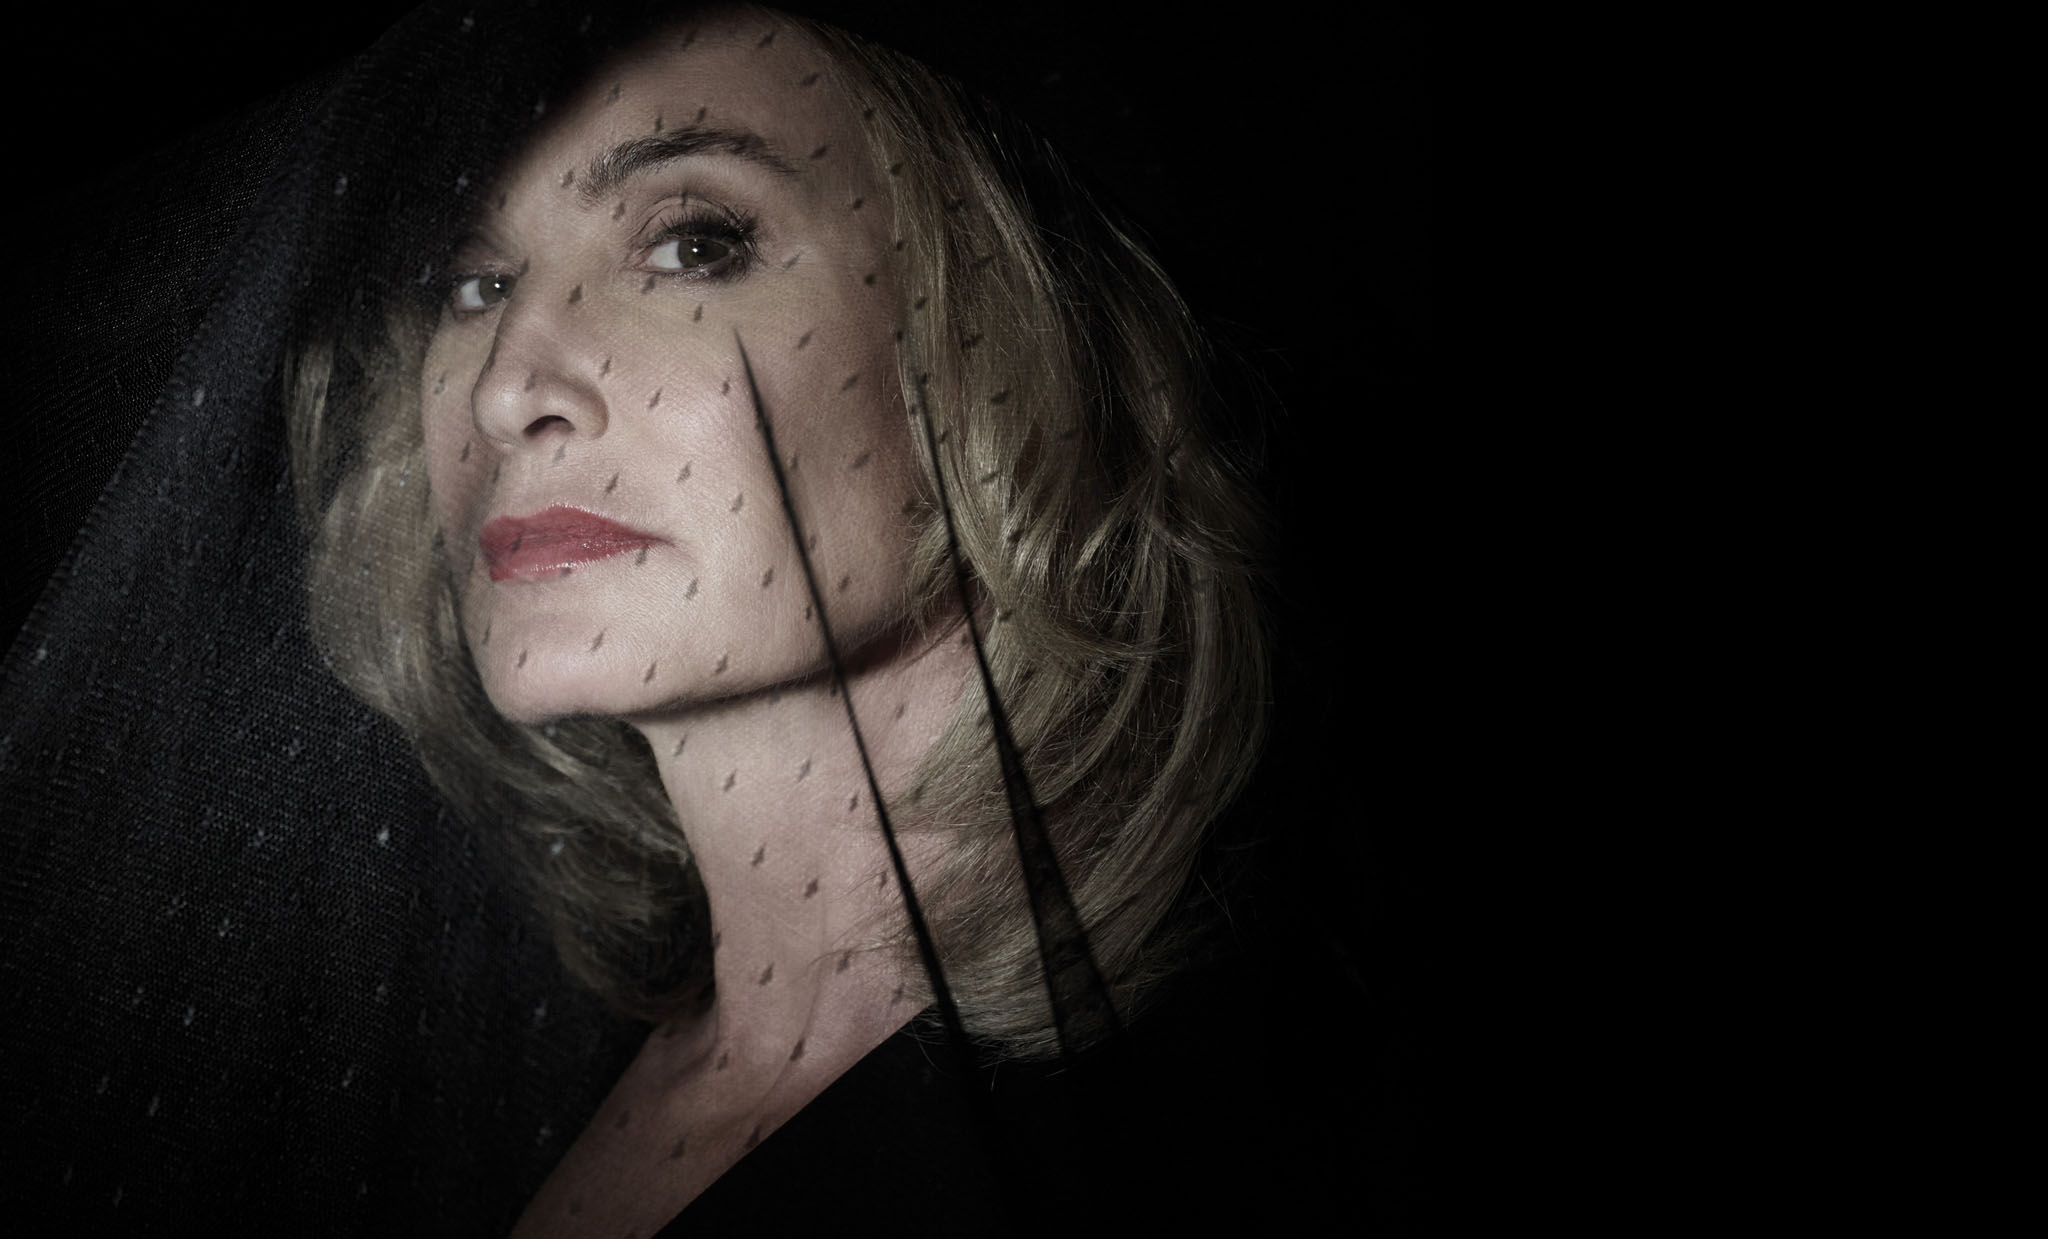 TV Show American Horror Story HD Wallpaper | Background Image